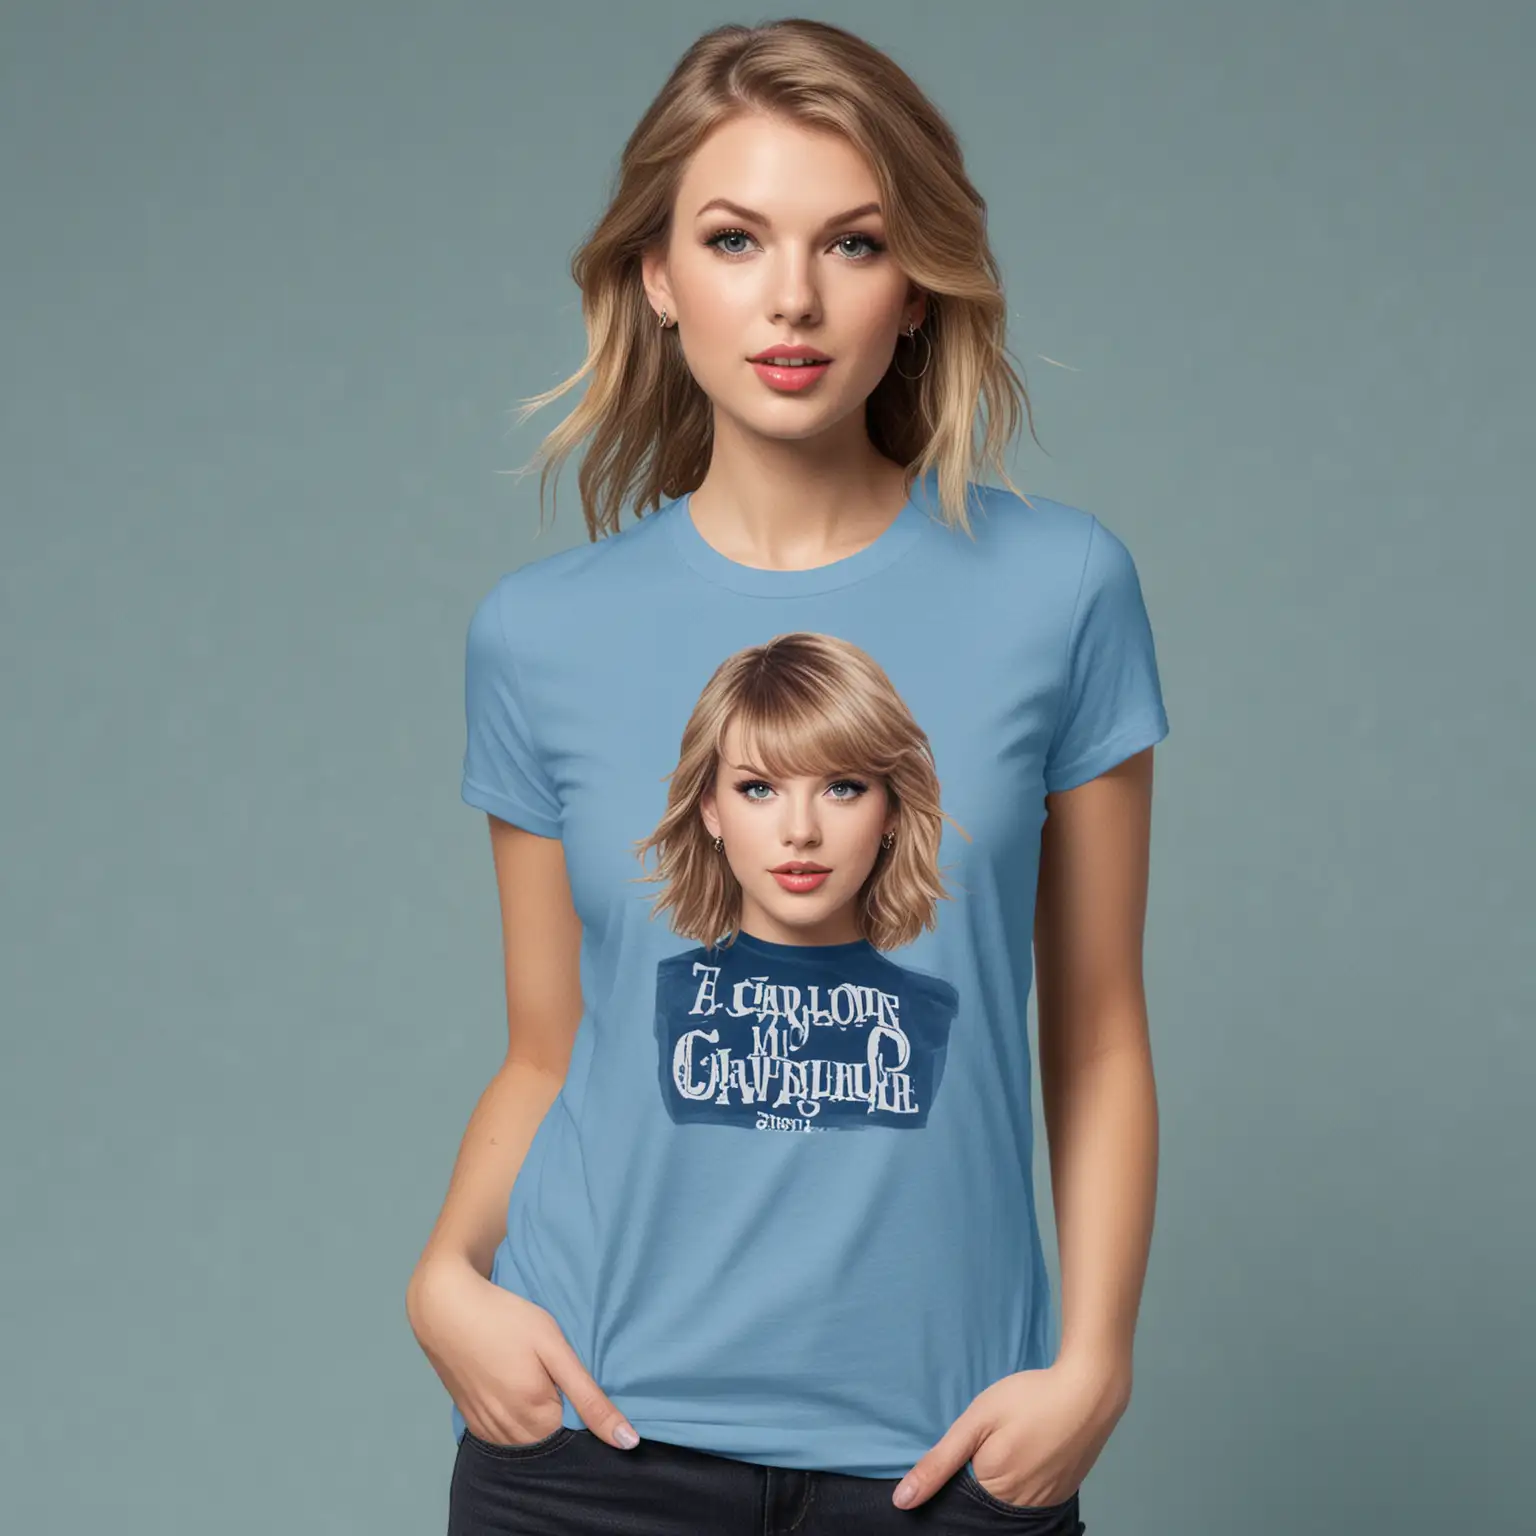 a mockup for a caroline blue tee.  the model should female and reseble taylor swift